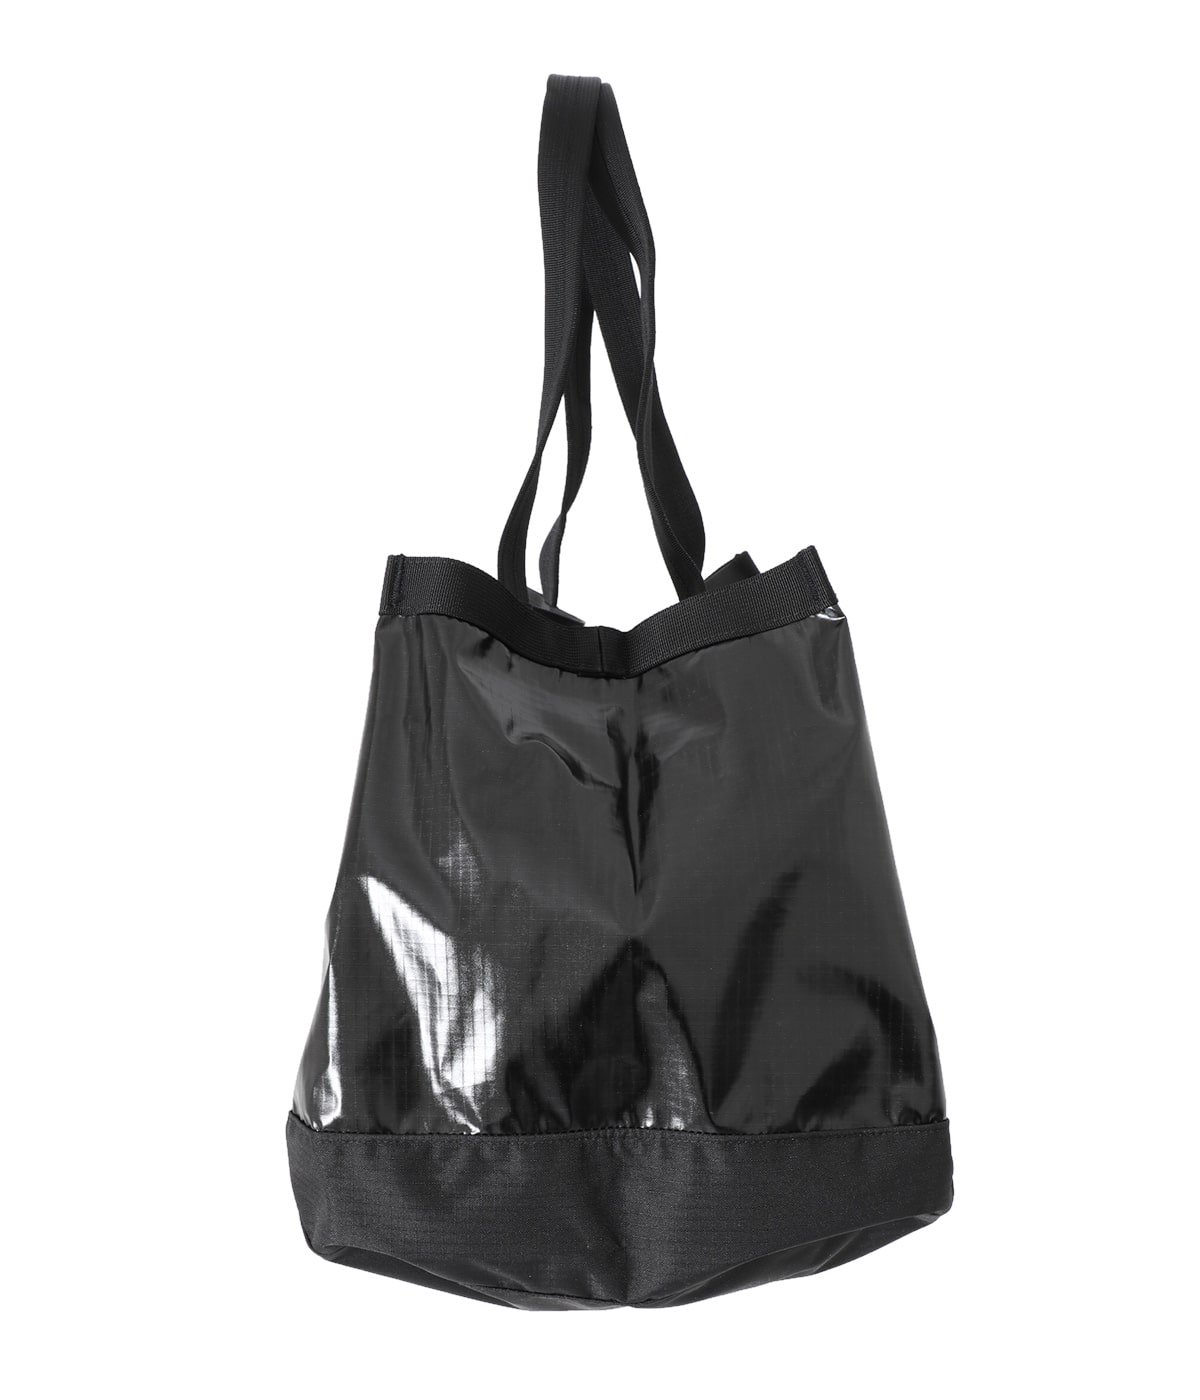 Black Hole Tote 25L -BLK- | patagonia(パタゴニア) / バッグ トート 